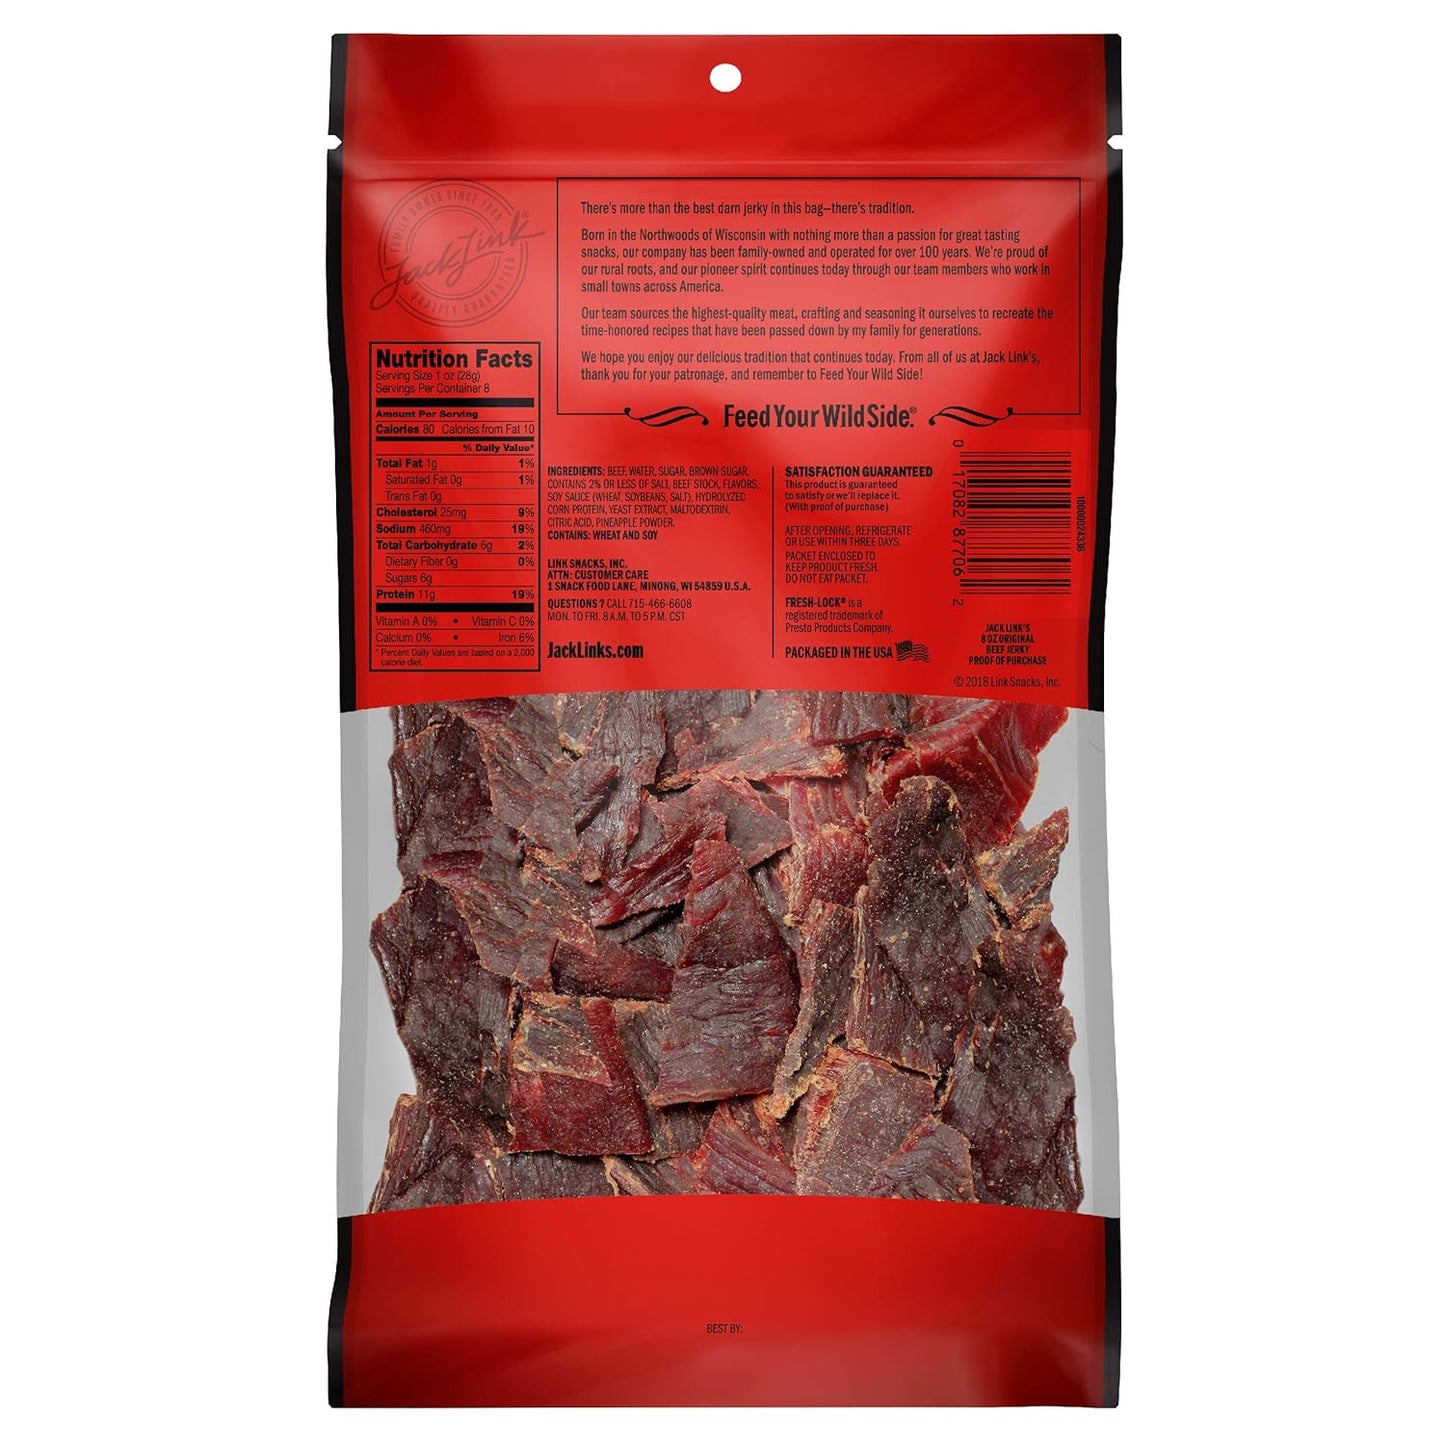 Beef Jerky, Original, 1/2 Pounder Bag - Flavorful Meat Snack, 10G of Protein and 80 Calories, Made with Premium Beef - 96% Fat Free, No Added MSG** or Nitrates/Nitrites, 8Oz